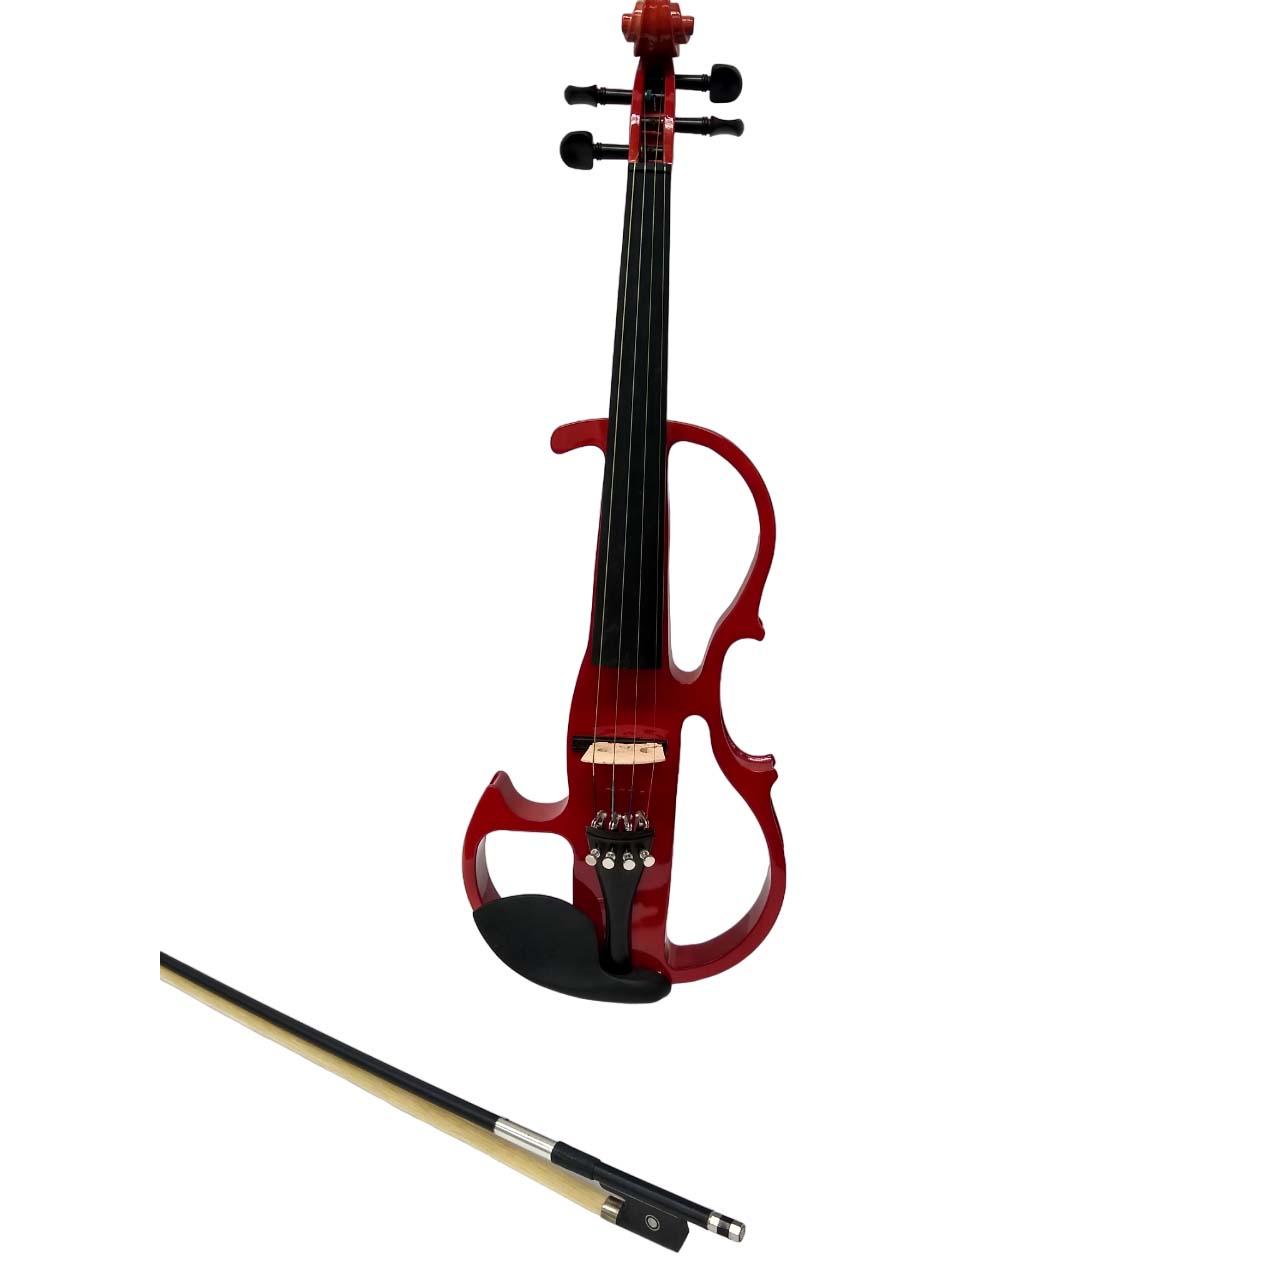   Vienna Strings Electra Violin Shaped Cutaway Speedway - Red